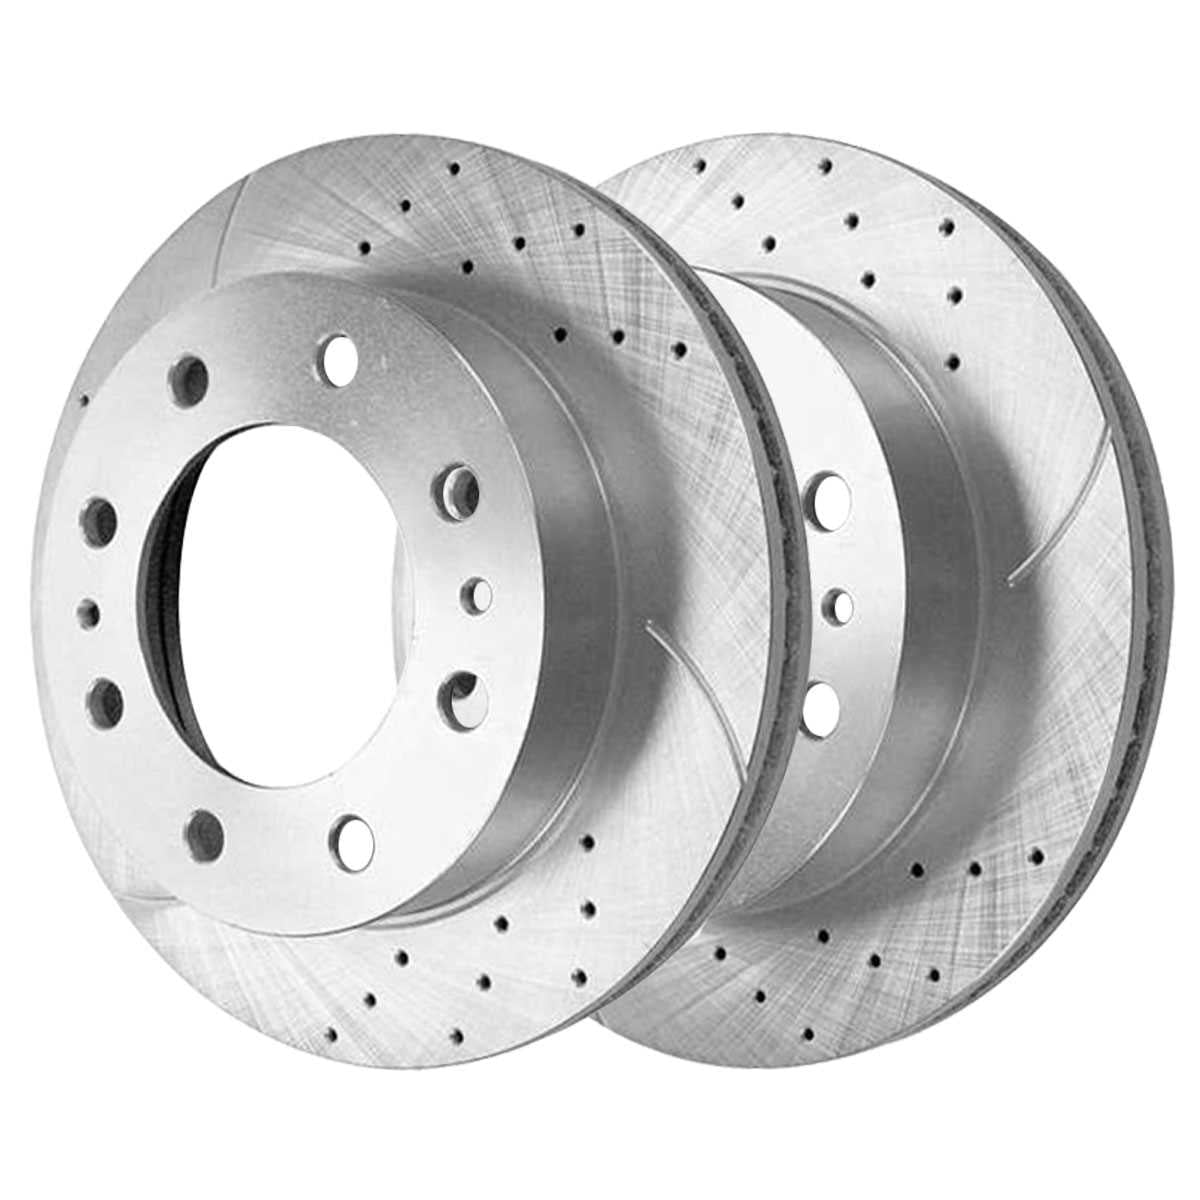 Front Drilled Slotted Brake Rotors For Chevy Express GMC Sierra 1500 2500 3500